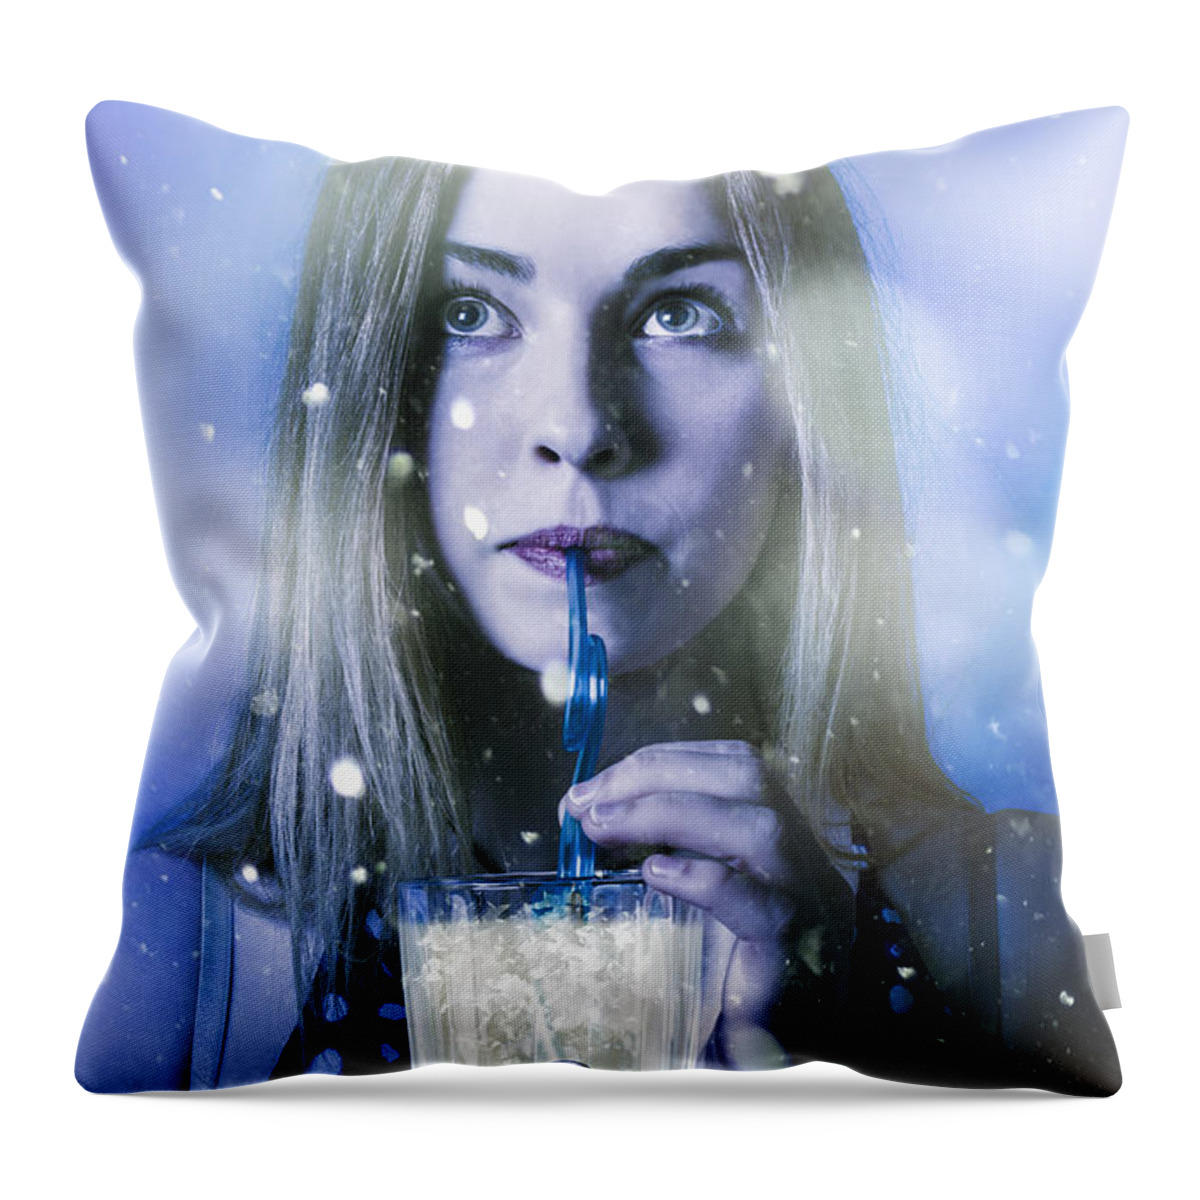 Milkshake Throw Pillow featuring the photograph Winter woman drinking ice cold drink by Jorgo Photography